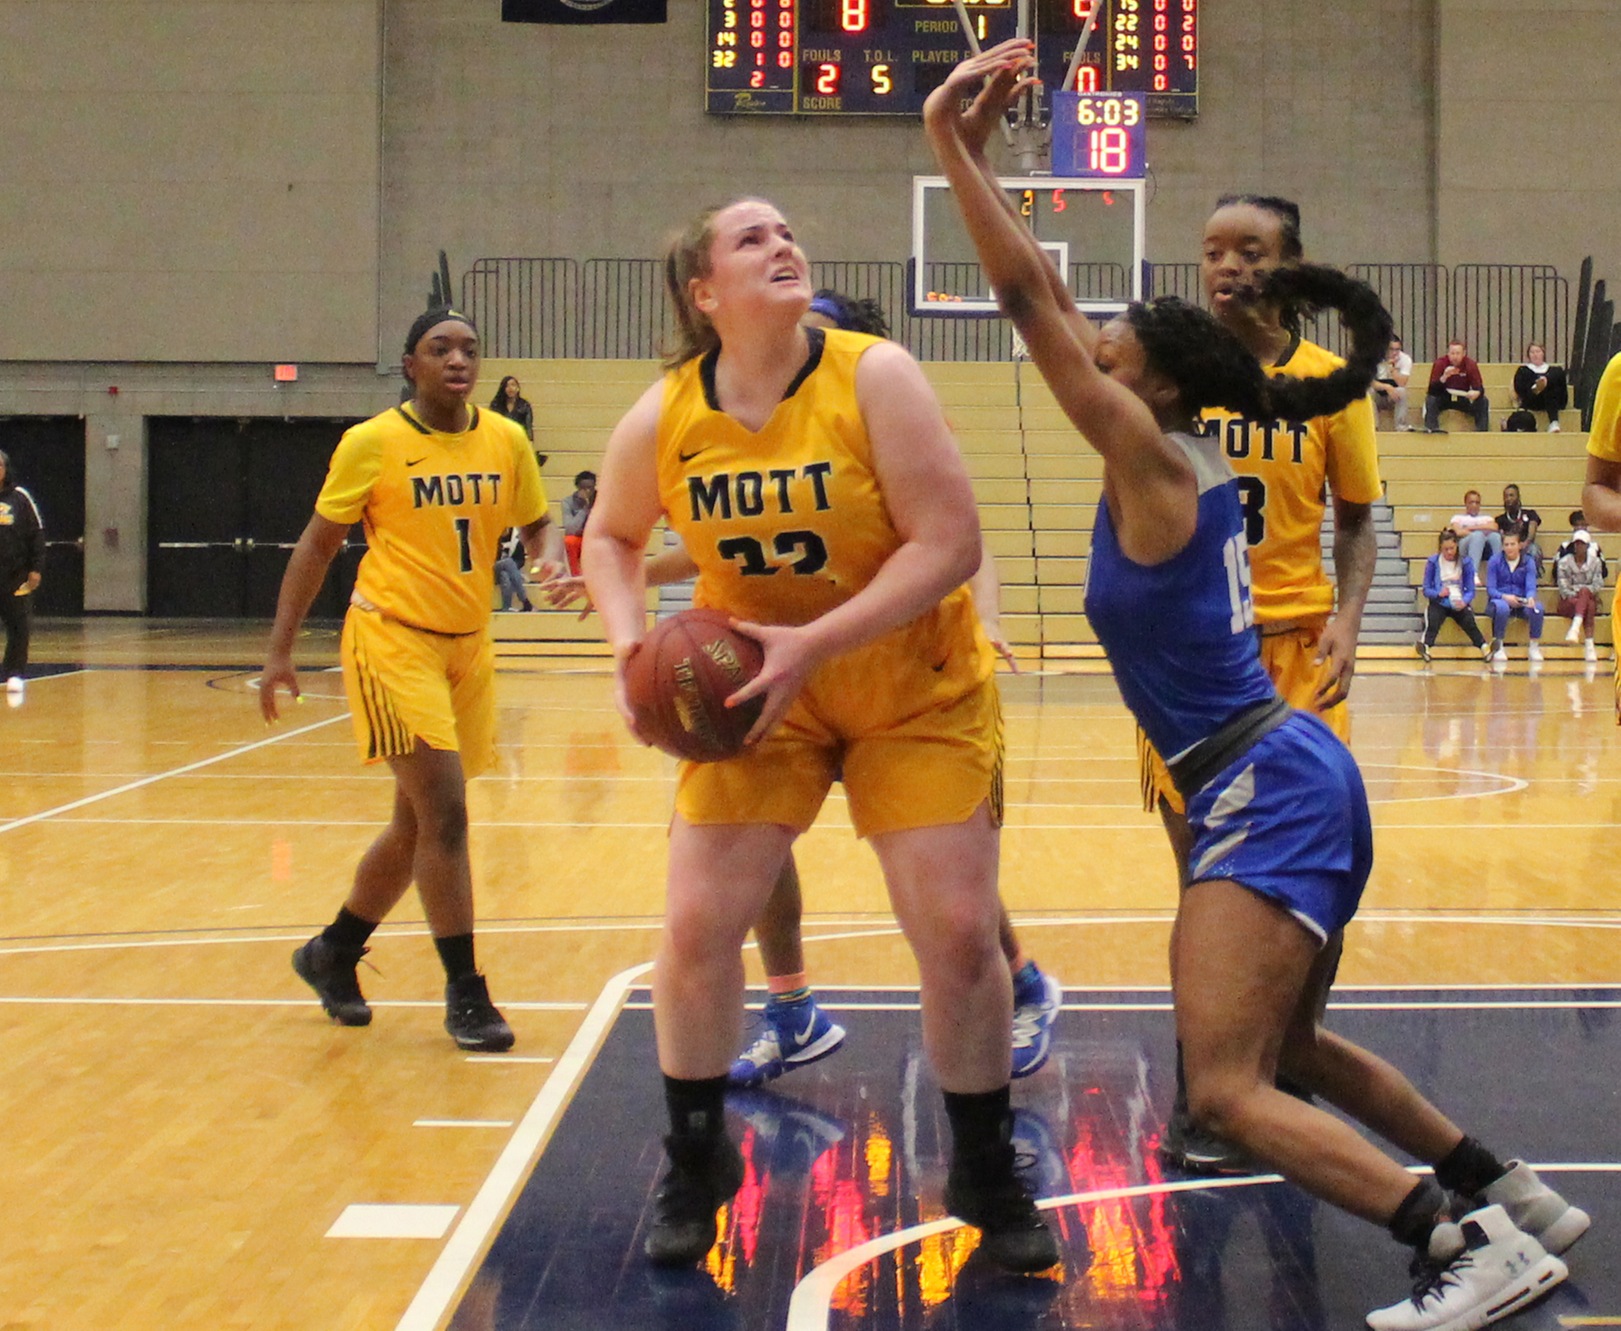 Molly Voelker of Mott CC goes up for the basket